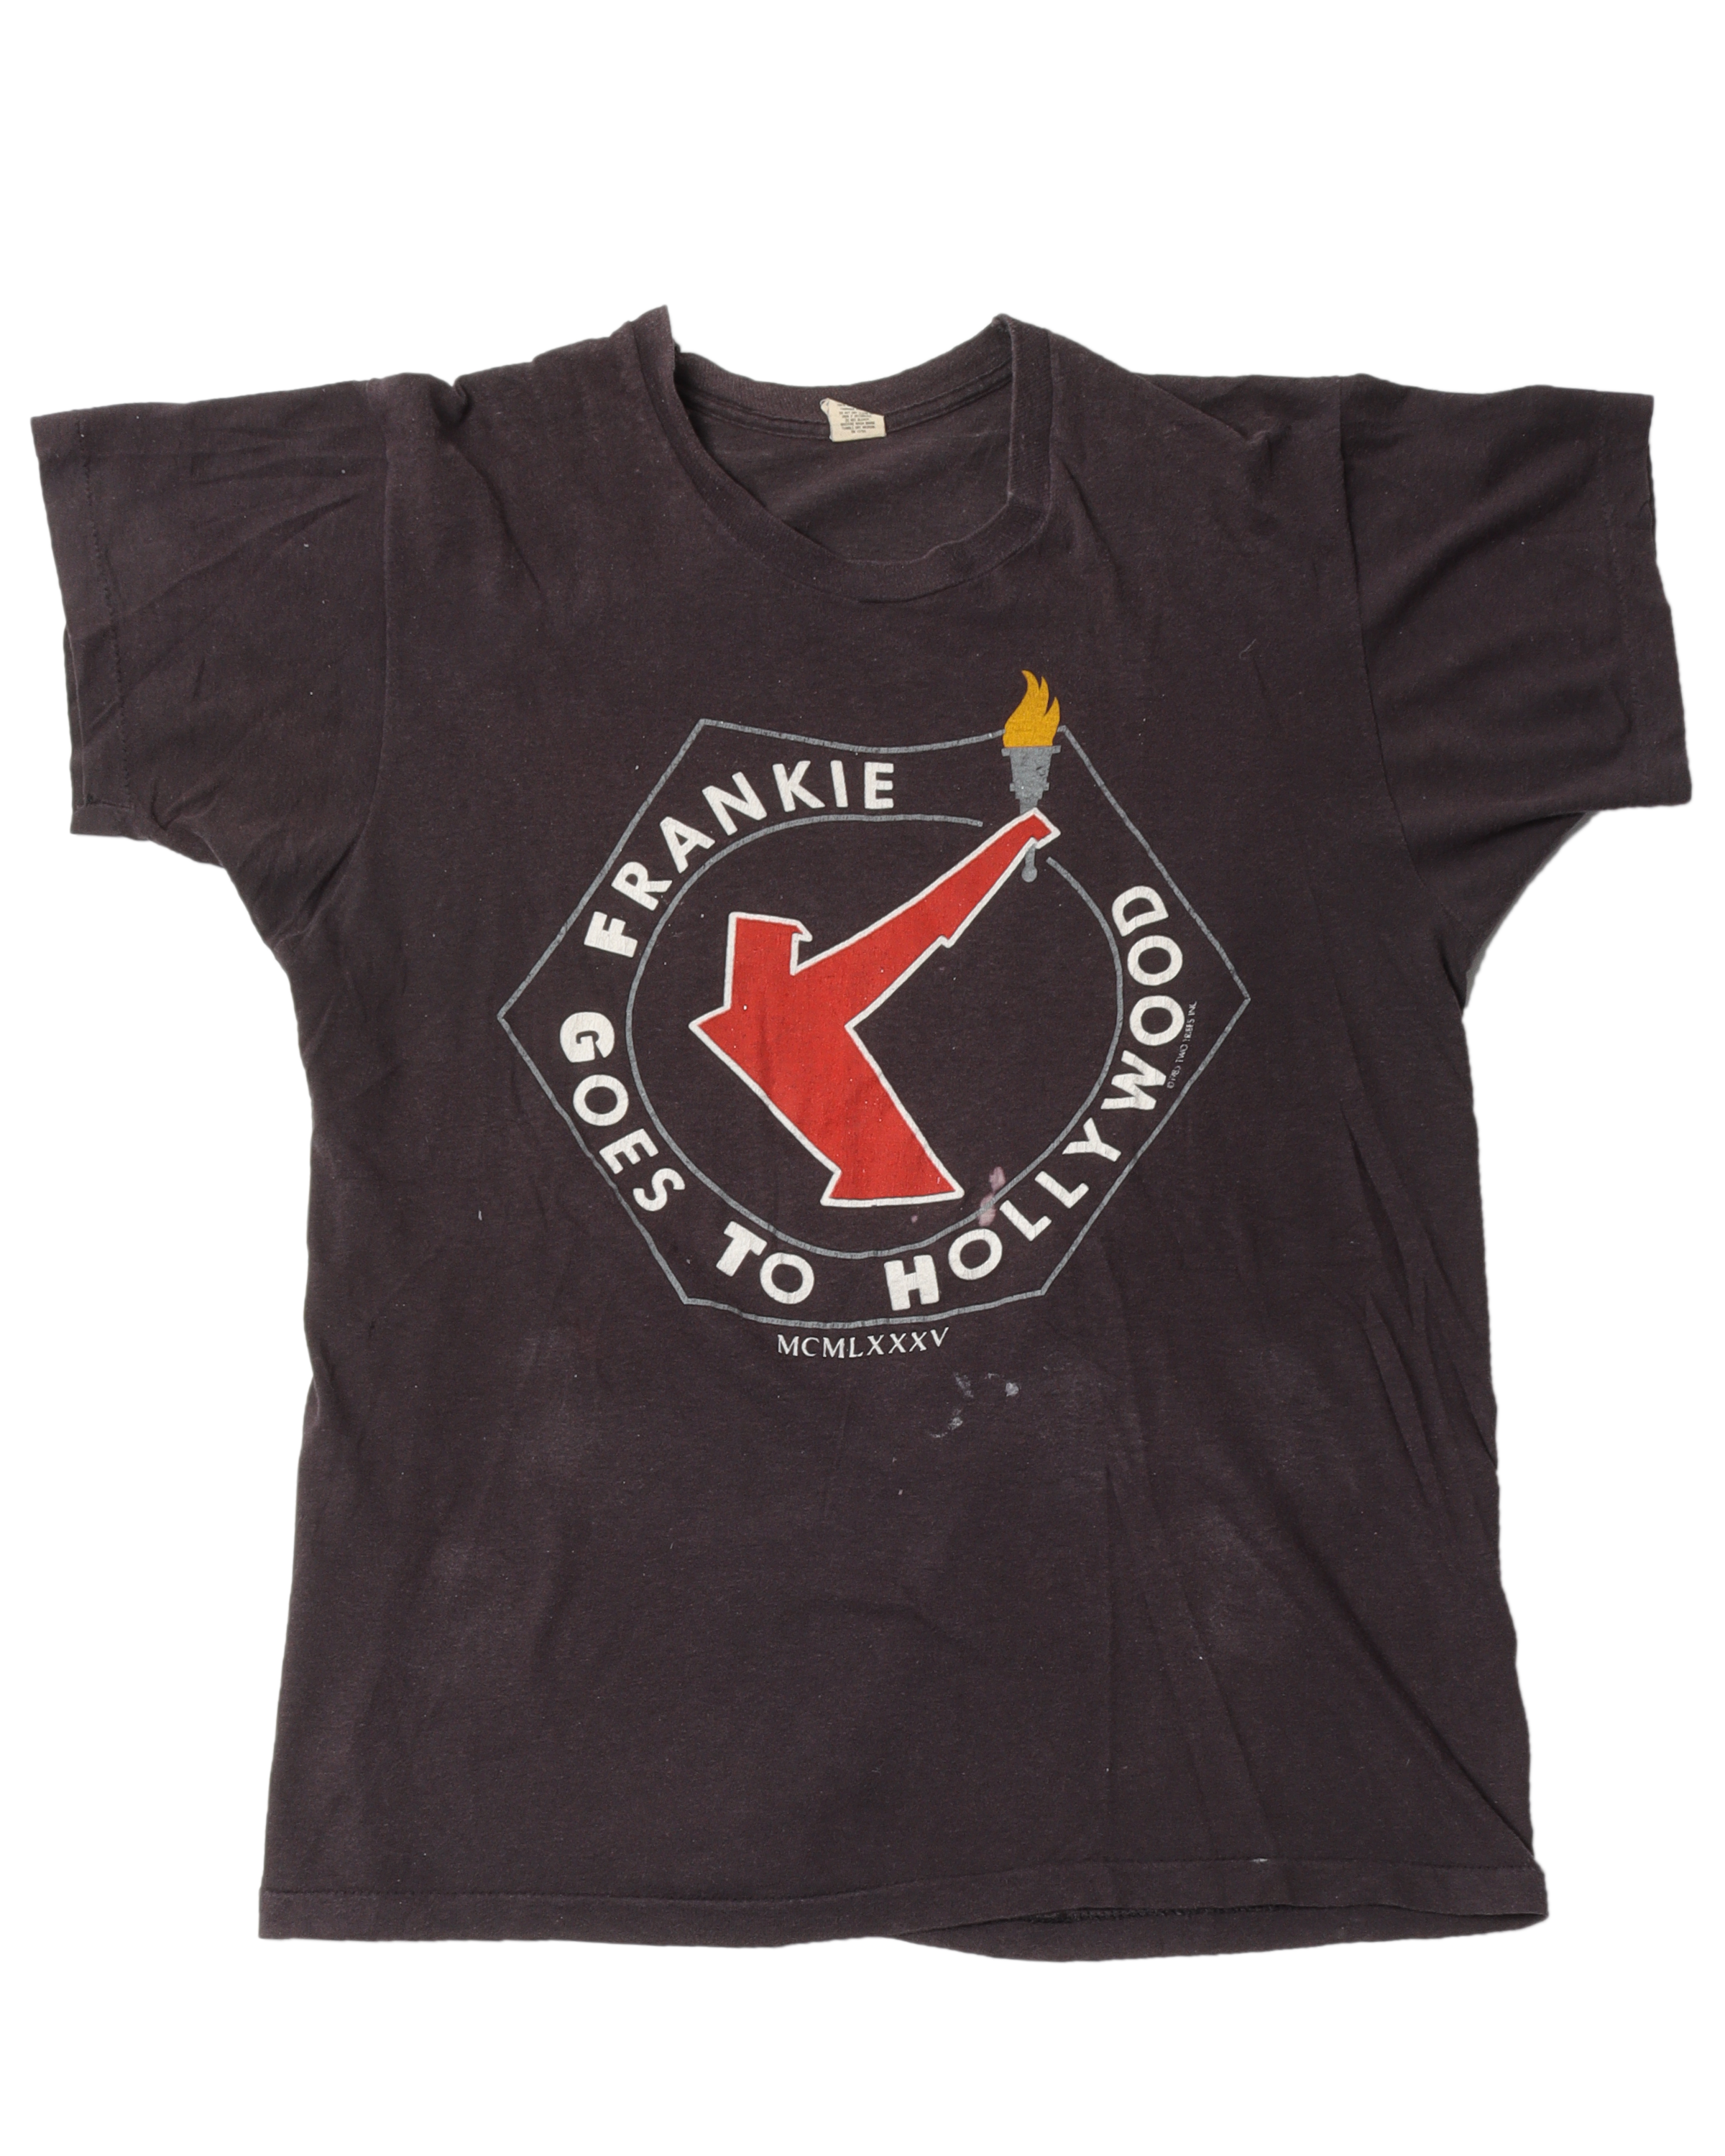 Vintage Frankie Goes To Hollywood T-Shirt